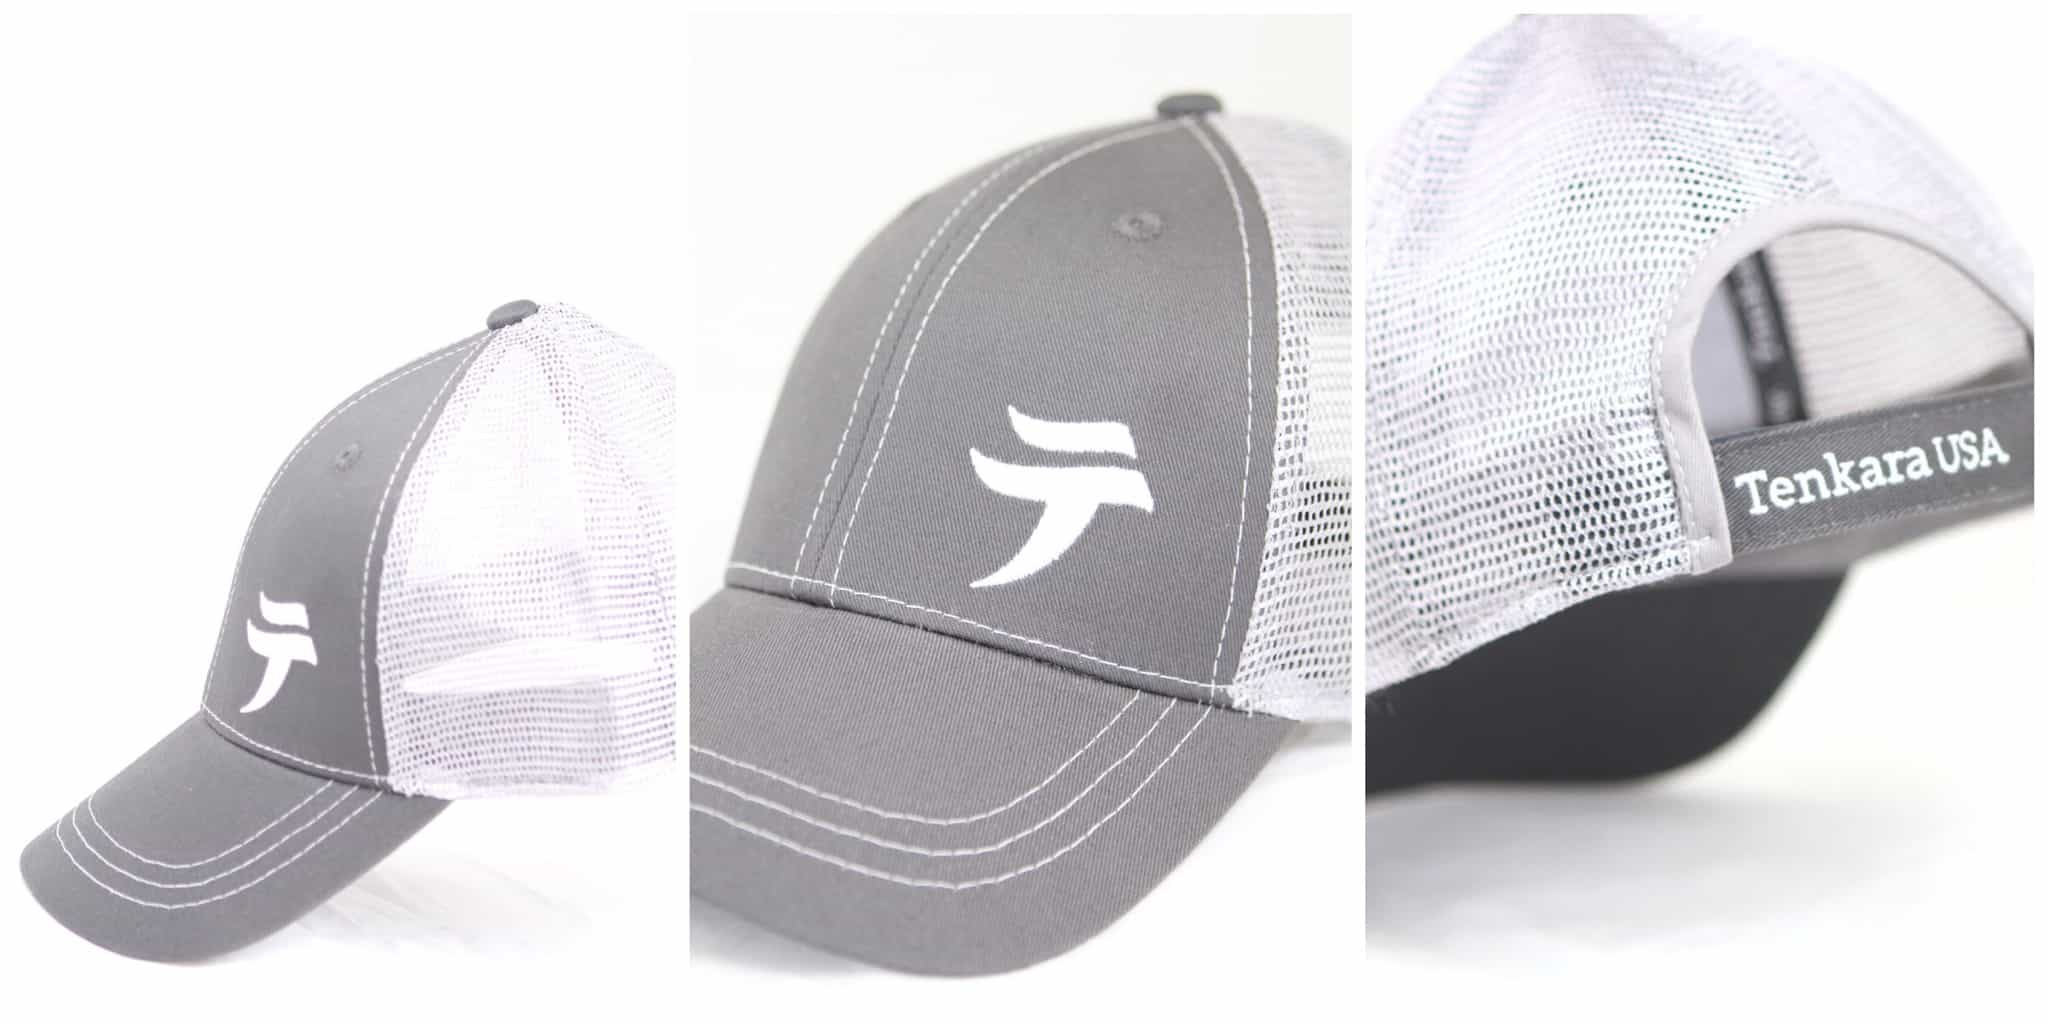 New tenkara hat and shirt designs now available